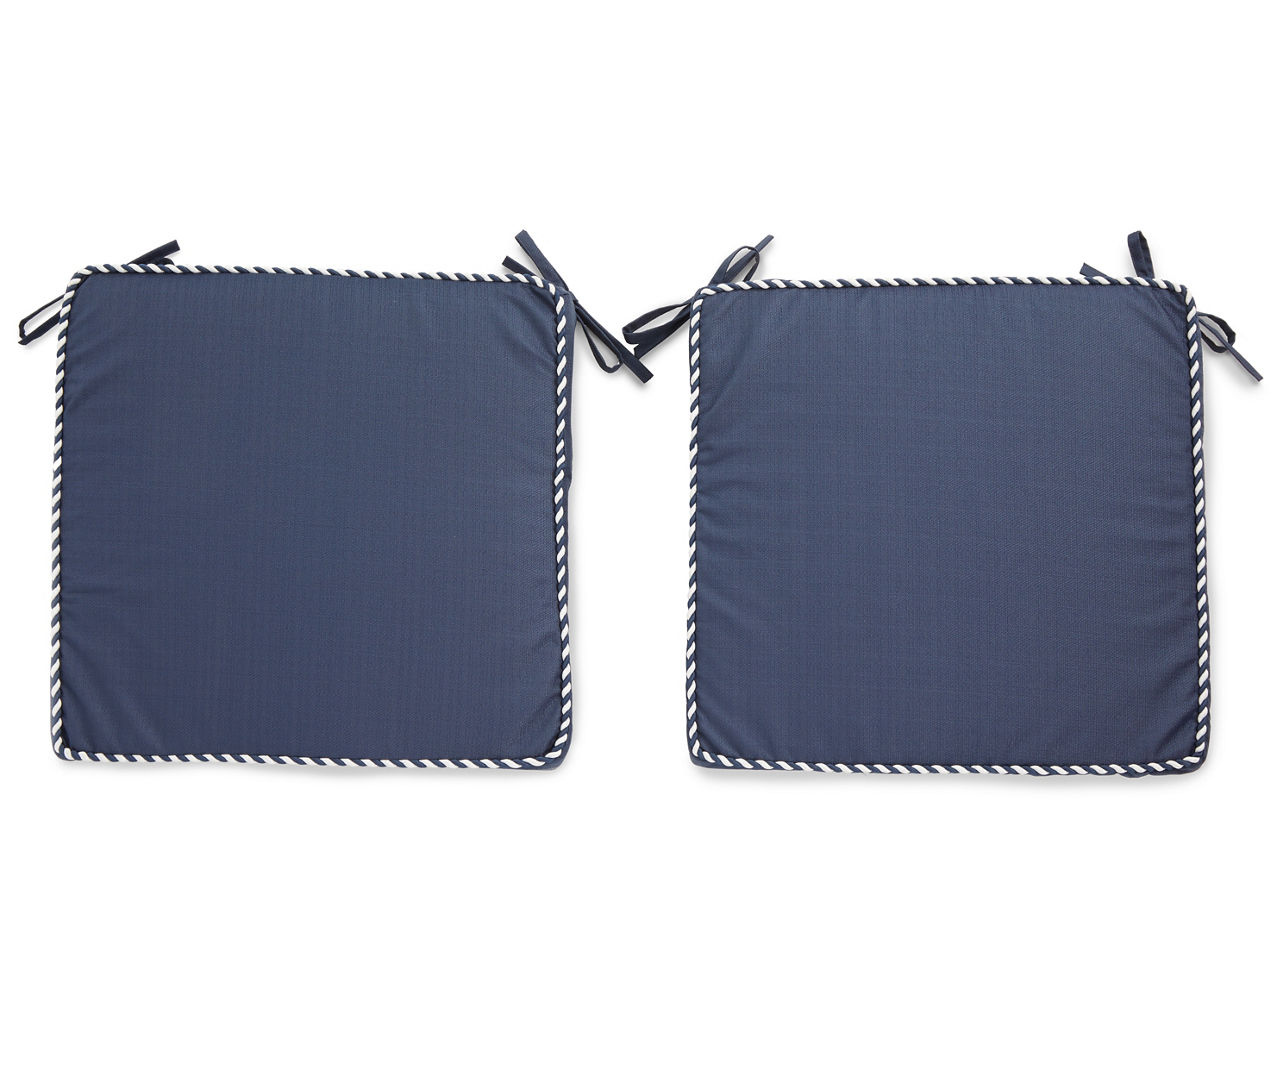 DELUXE NAVY WHITE 2 PK SEAT CUSHIONS